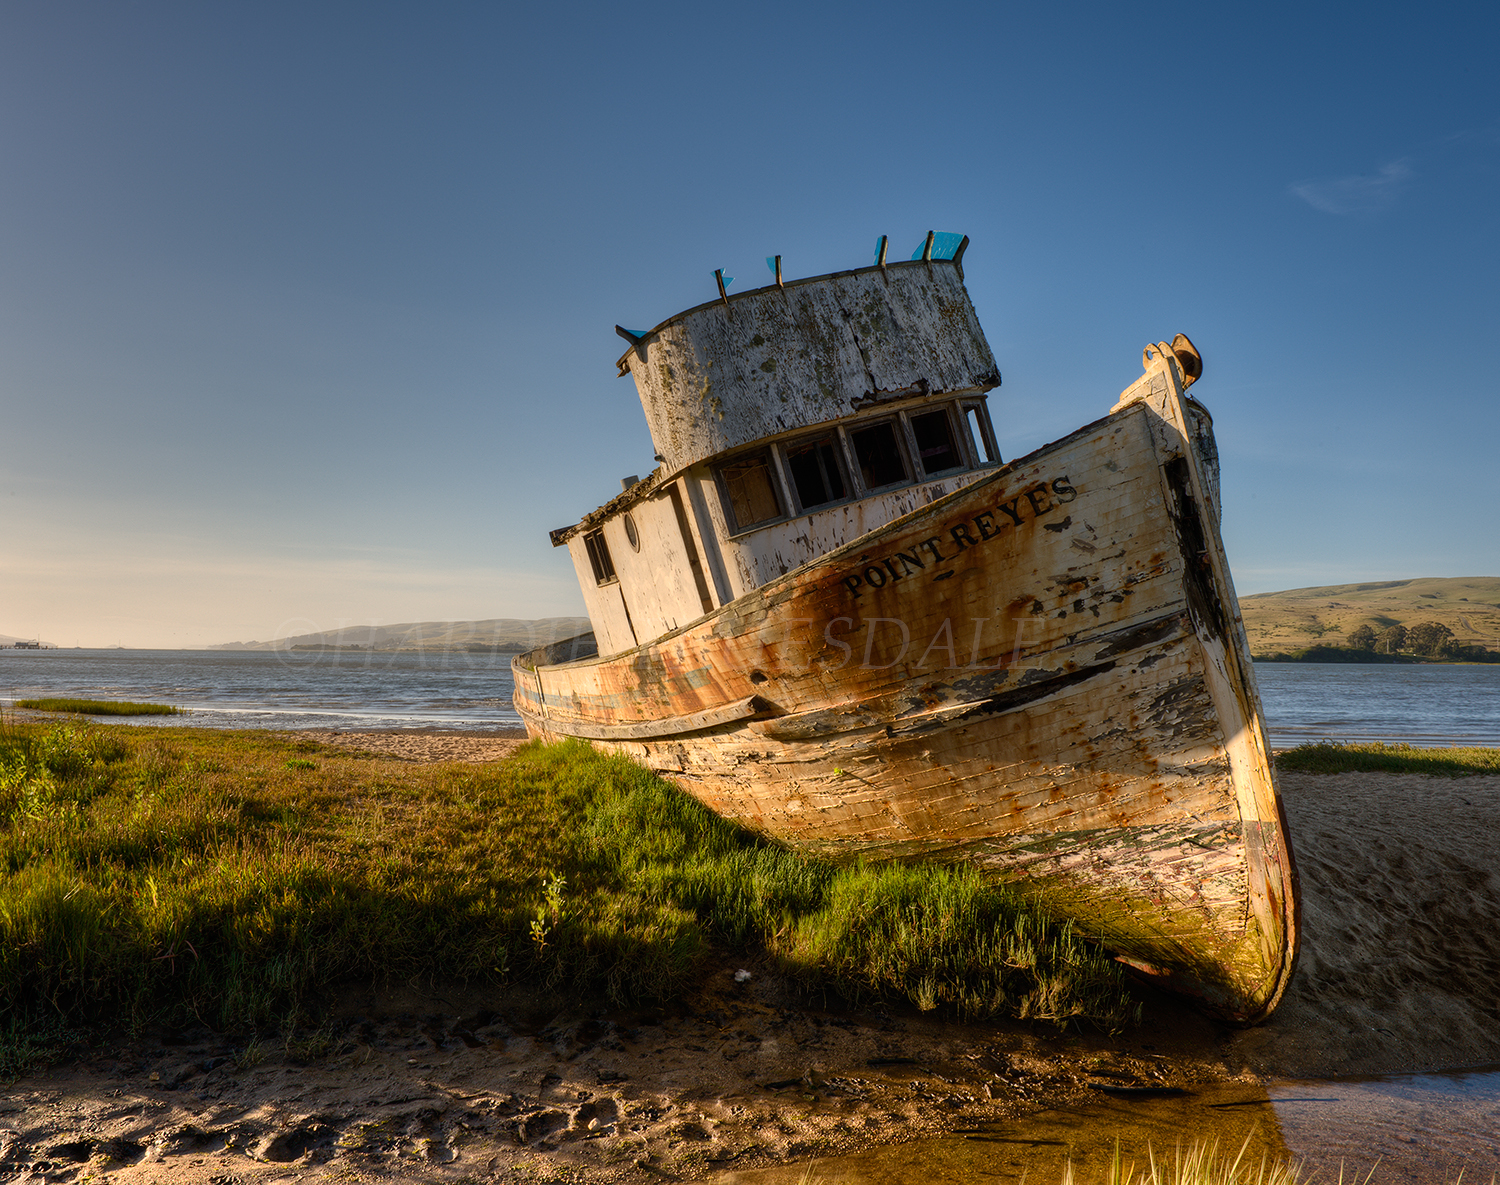 CA#133 Wrecked Boat, Tomales Bay, Point Reyes, CA